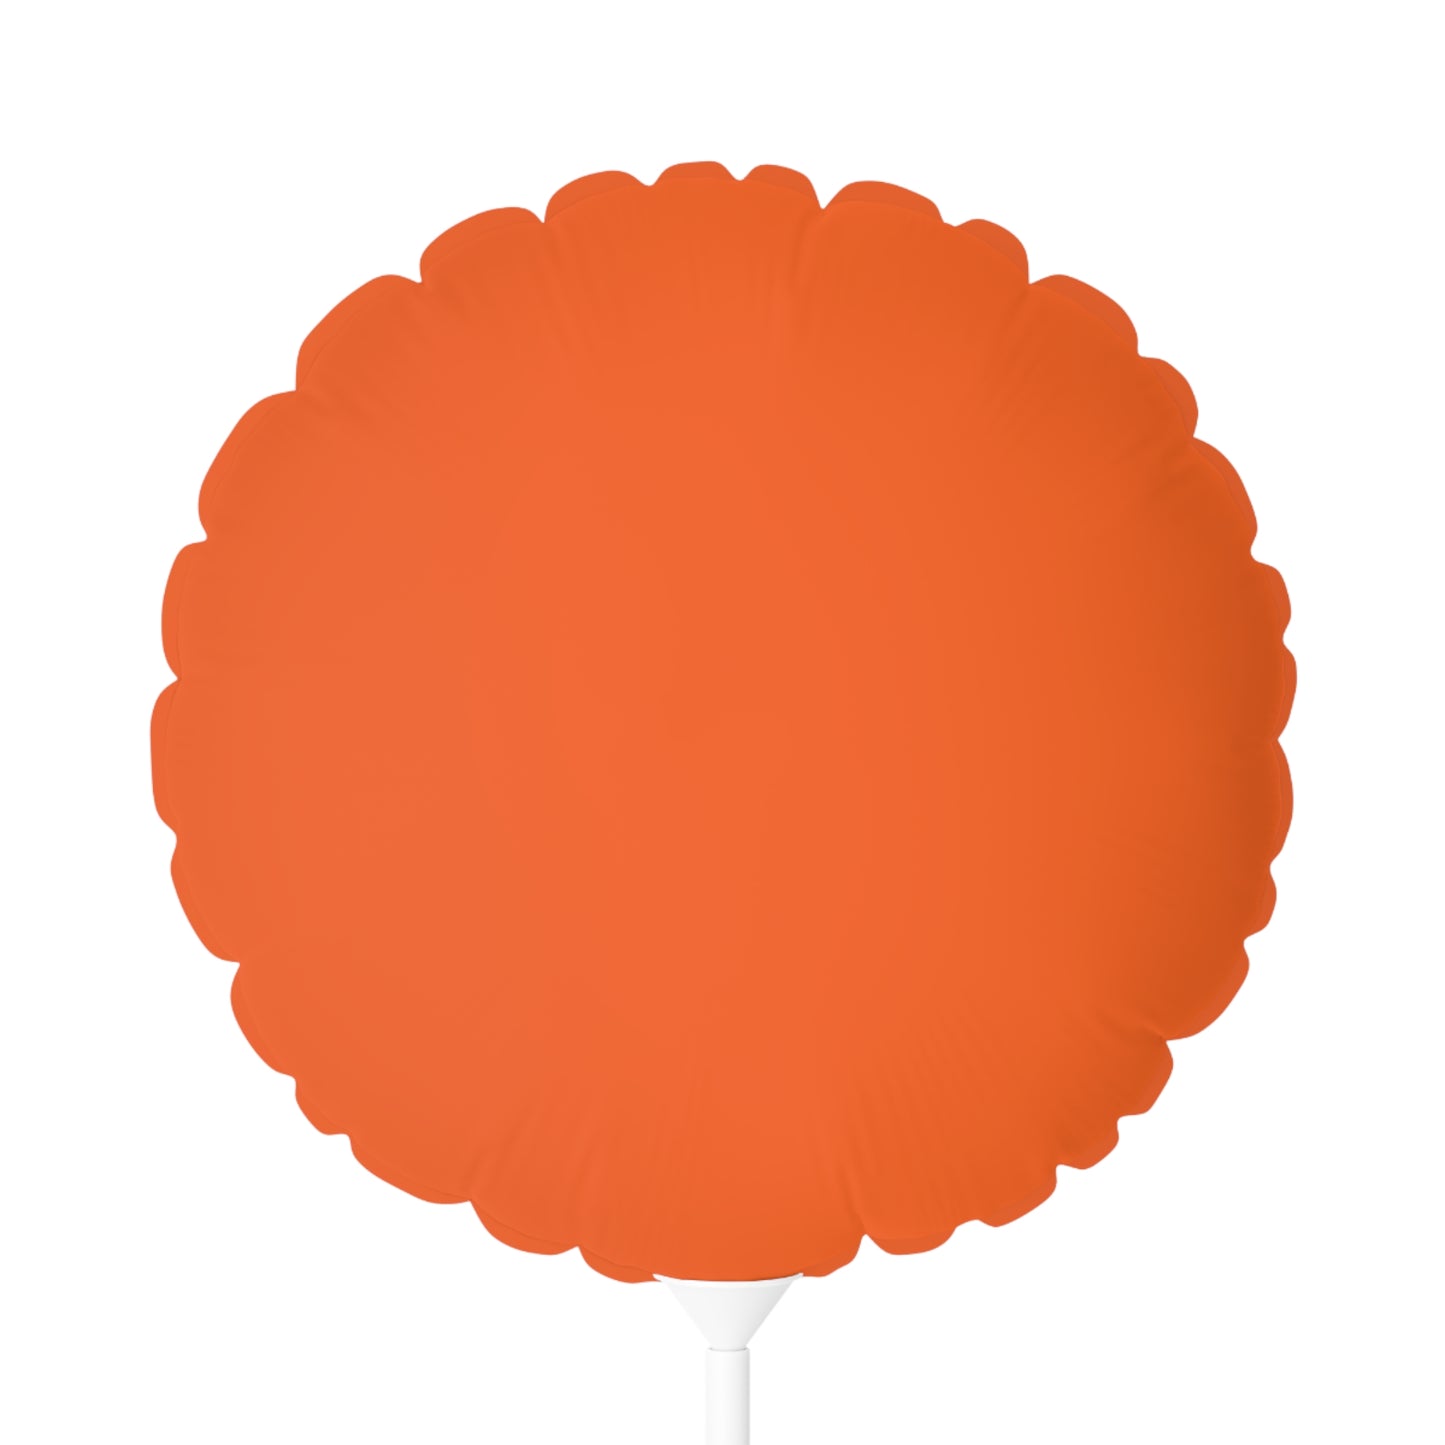 Hippie Mushroom Color Candy Style Design Style 2 Balloon (Round and Heart-shaped), 11"